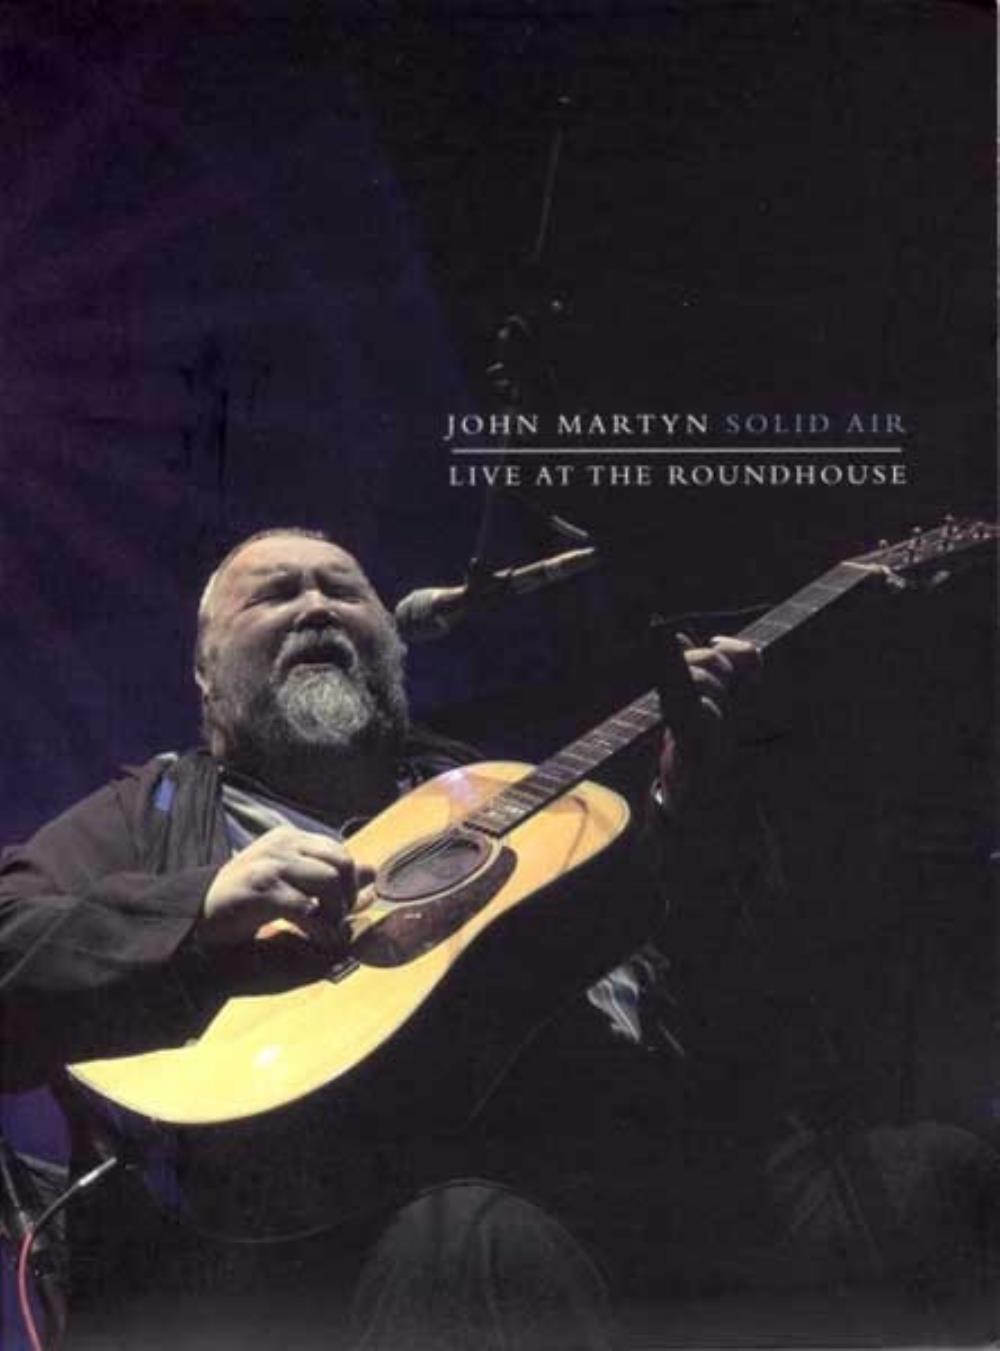 John Martyn Solid Air - Live at The Roundhouse album cover